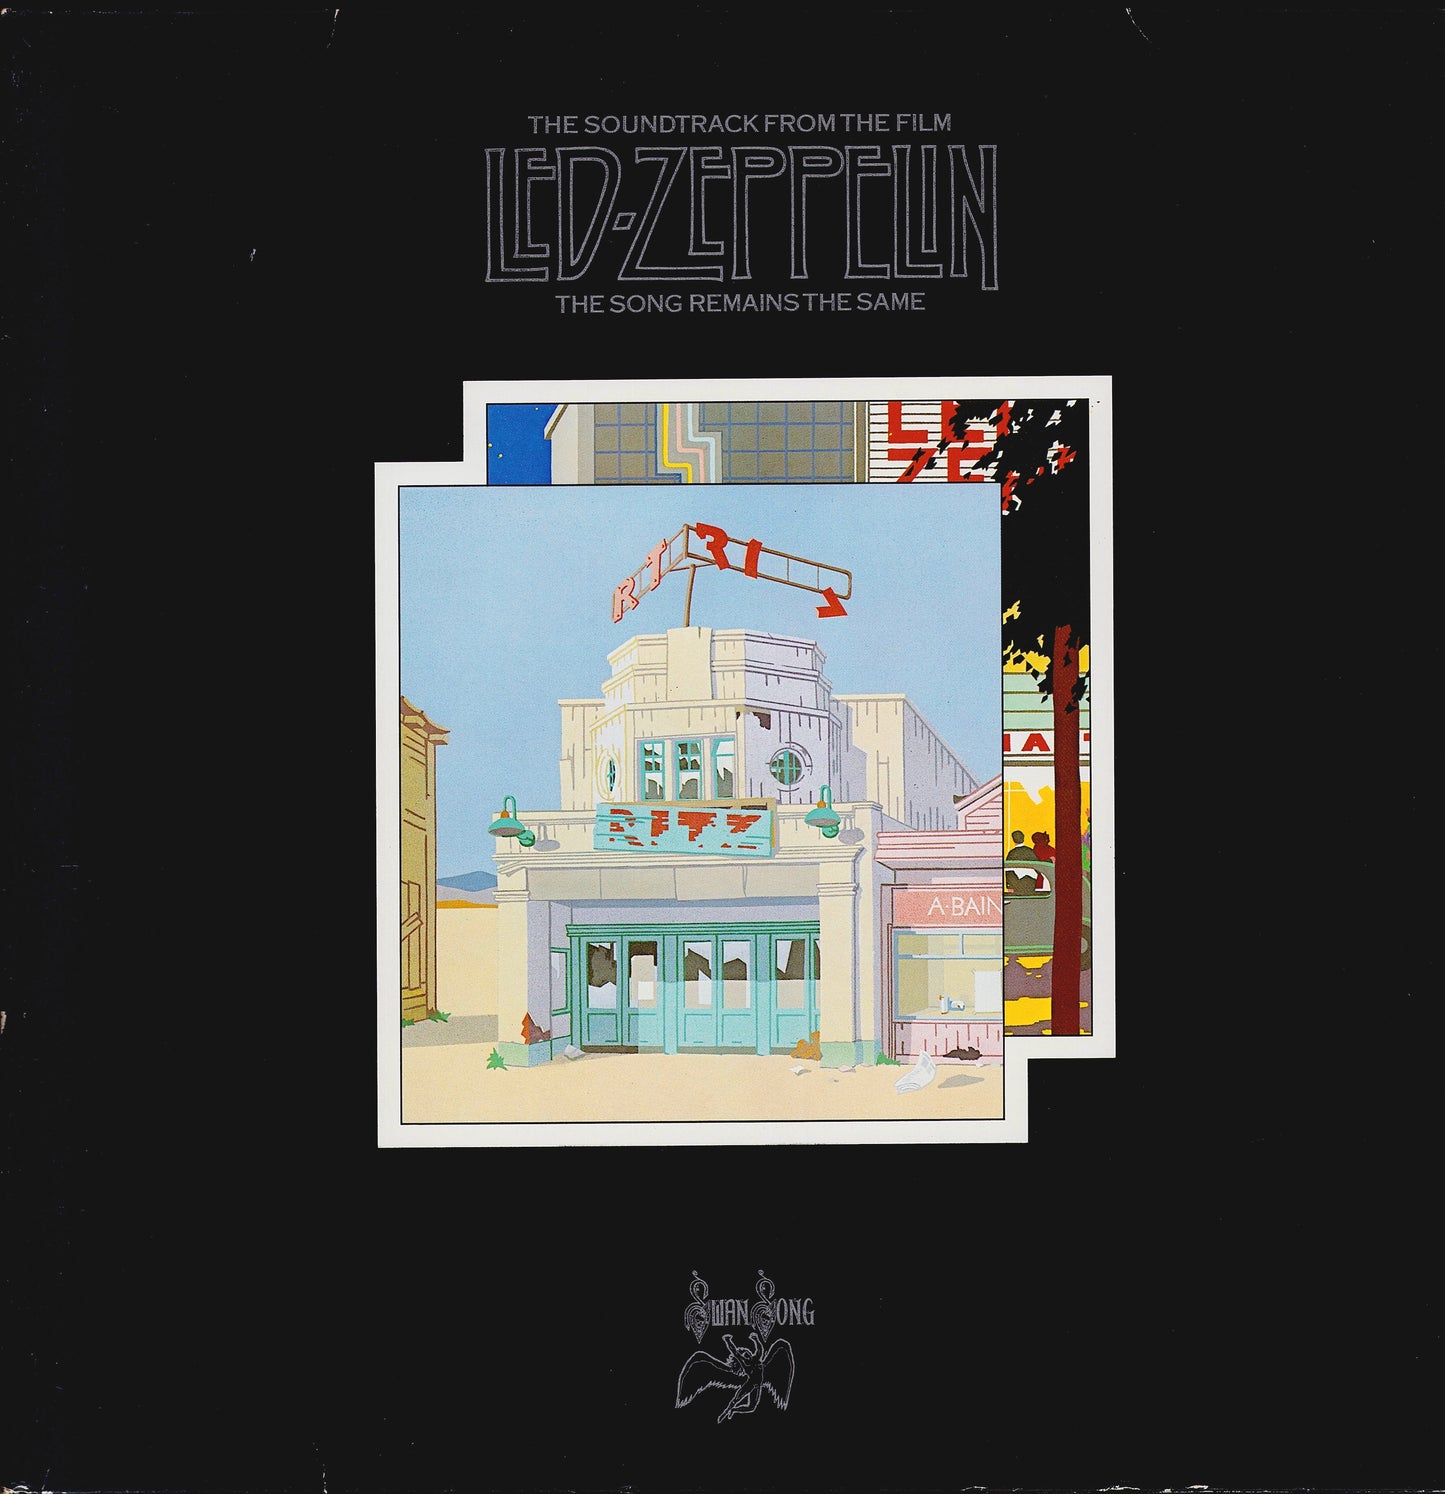 Led Zeppelin ‎- The Soundtrack From The Film The Song Remains The Same (Vinyl 2LP) DE